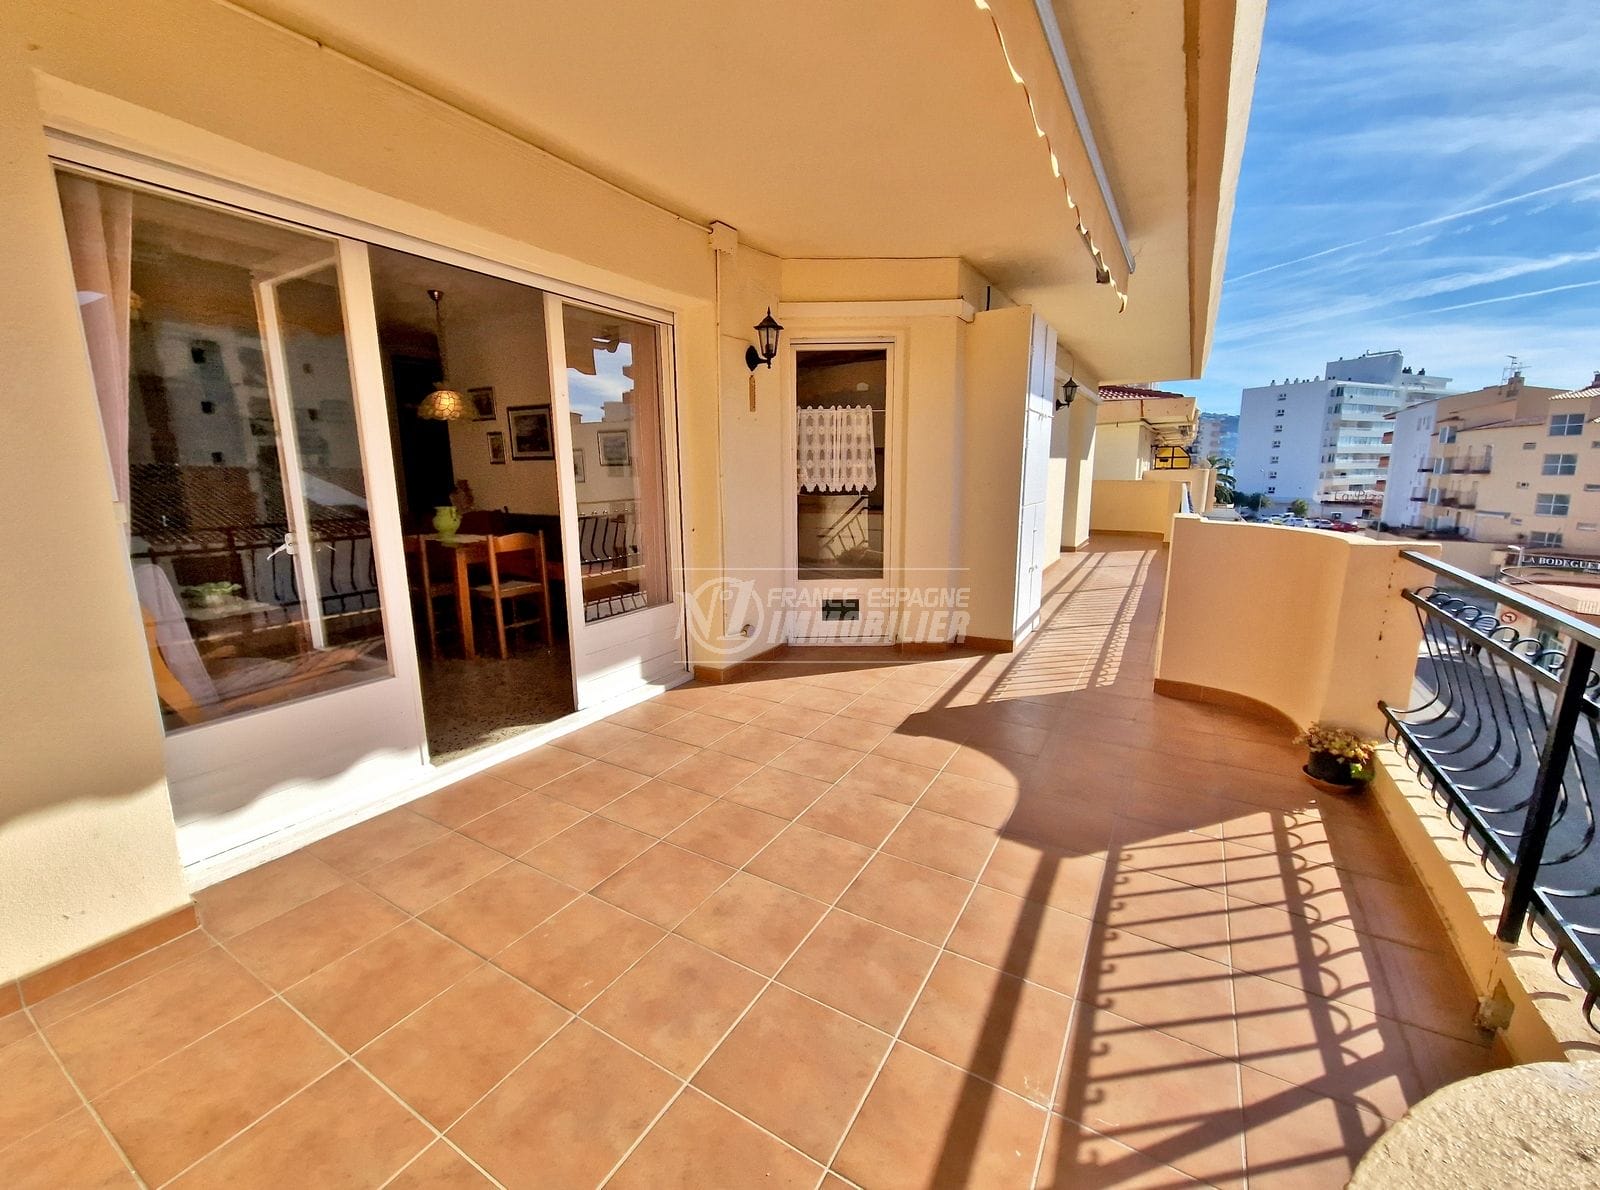 Exclusivity Roses - Appt with large terrace, private parking, beach 300m